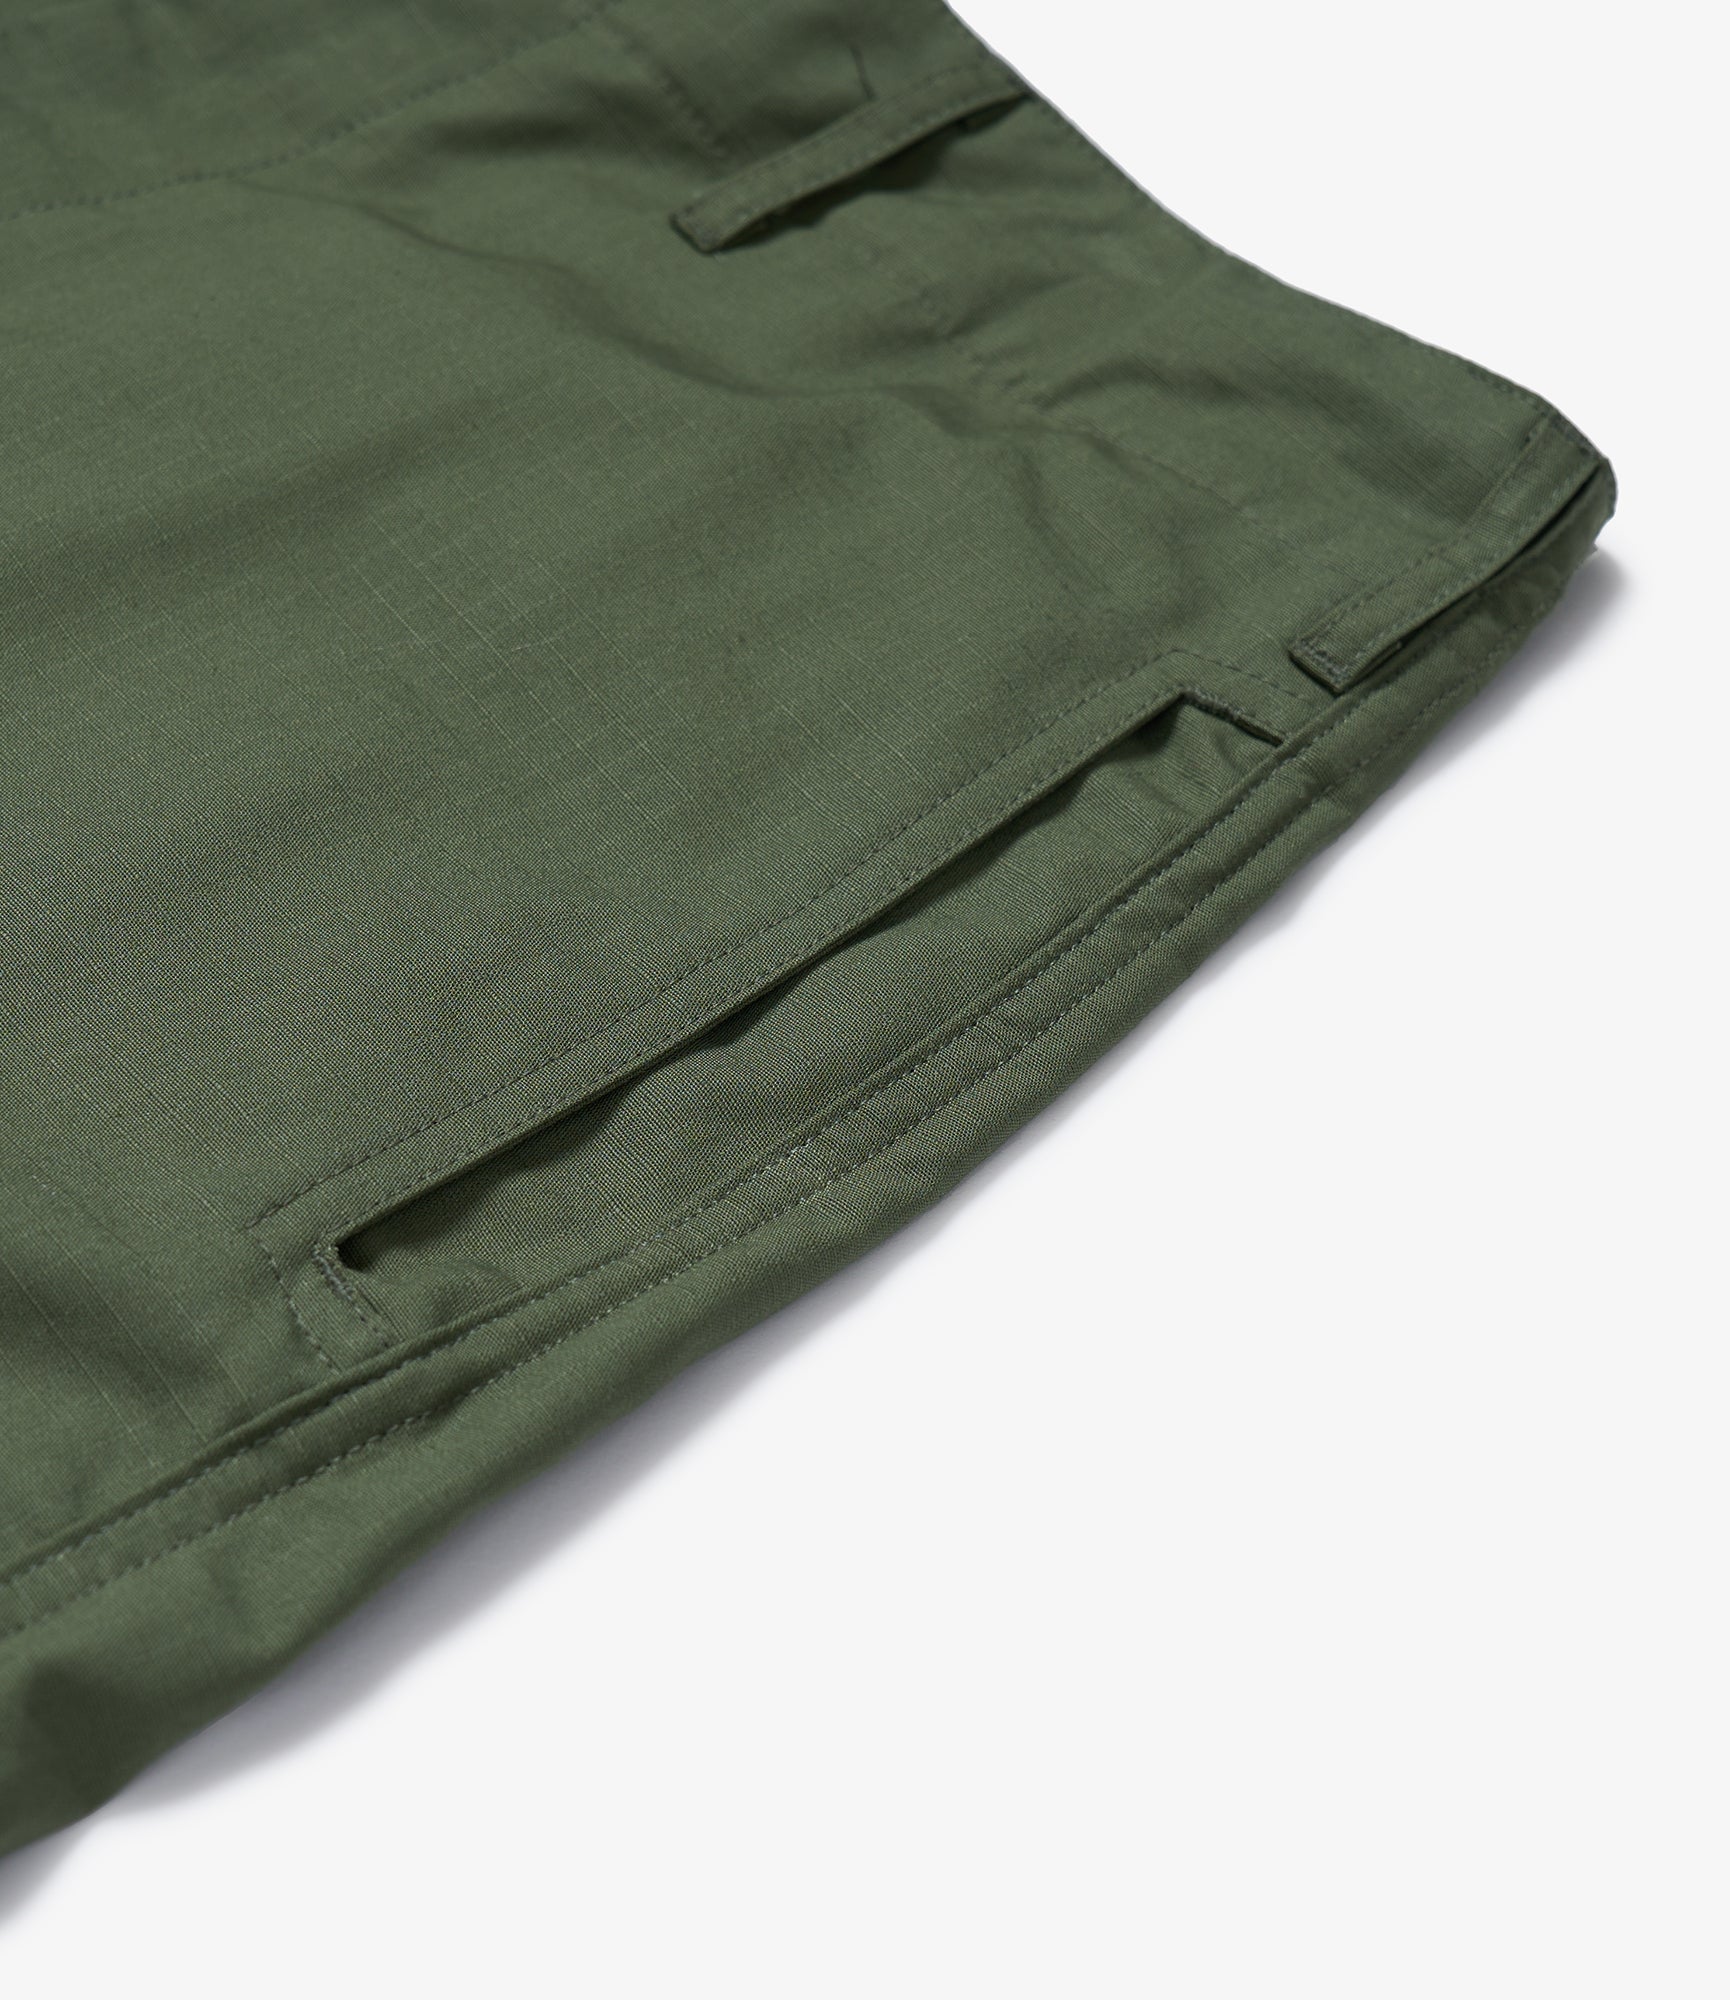 Utility Pant - Olive Cotton Ripstop